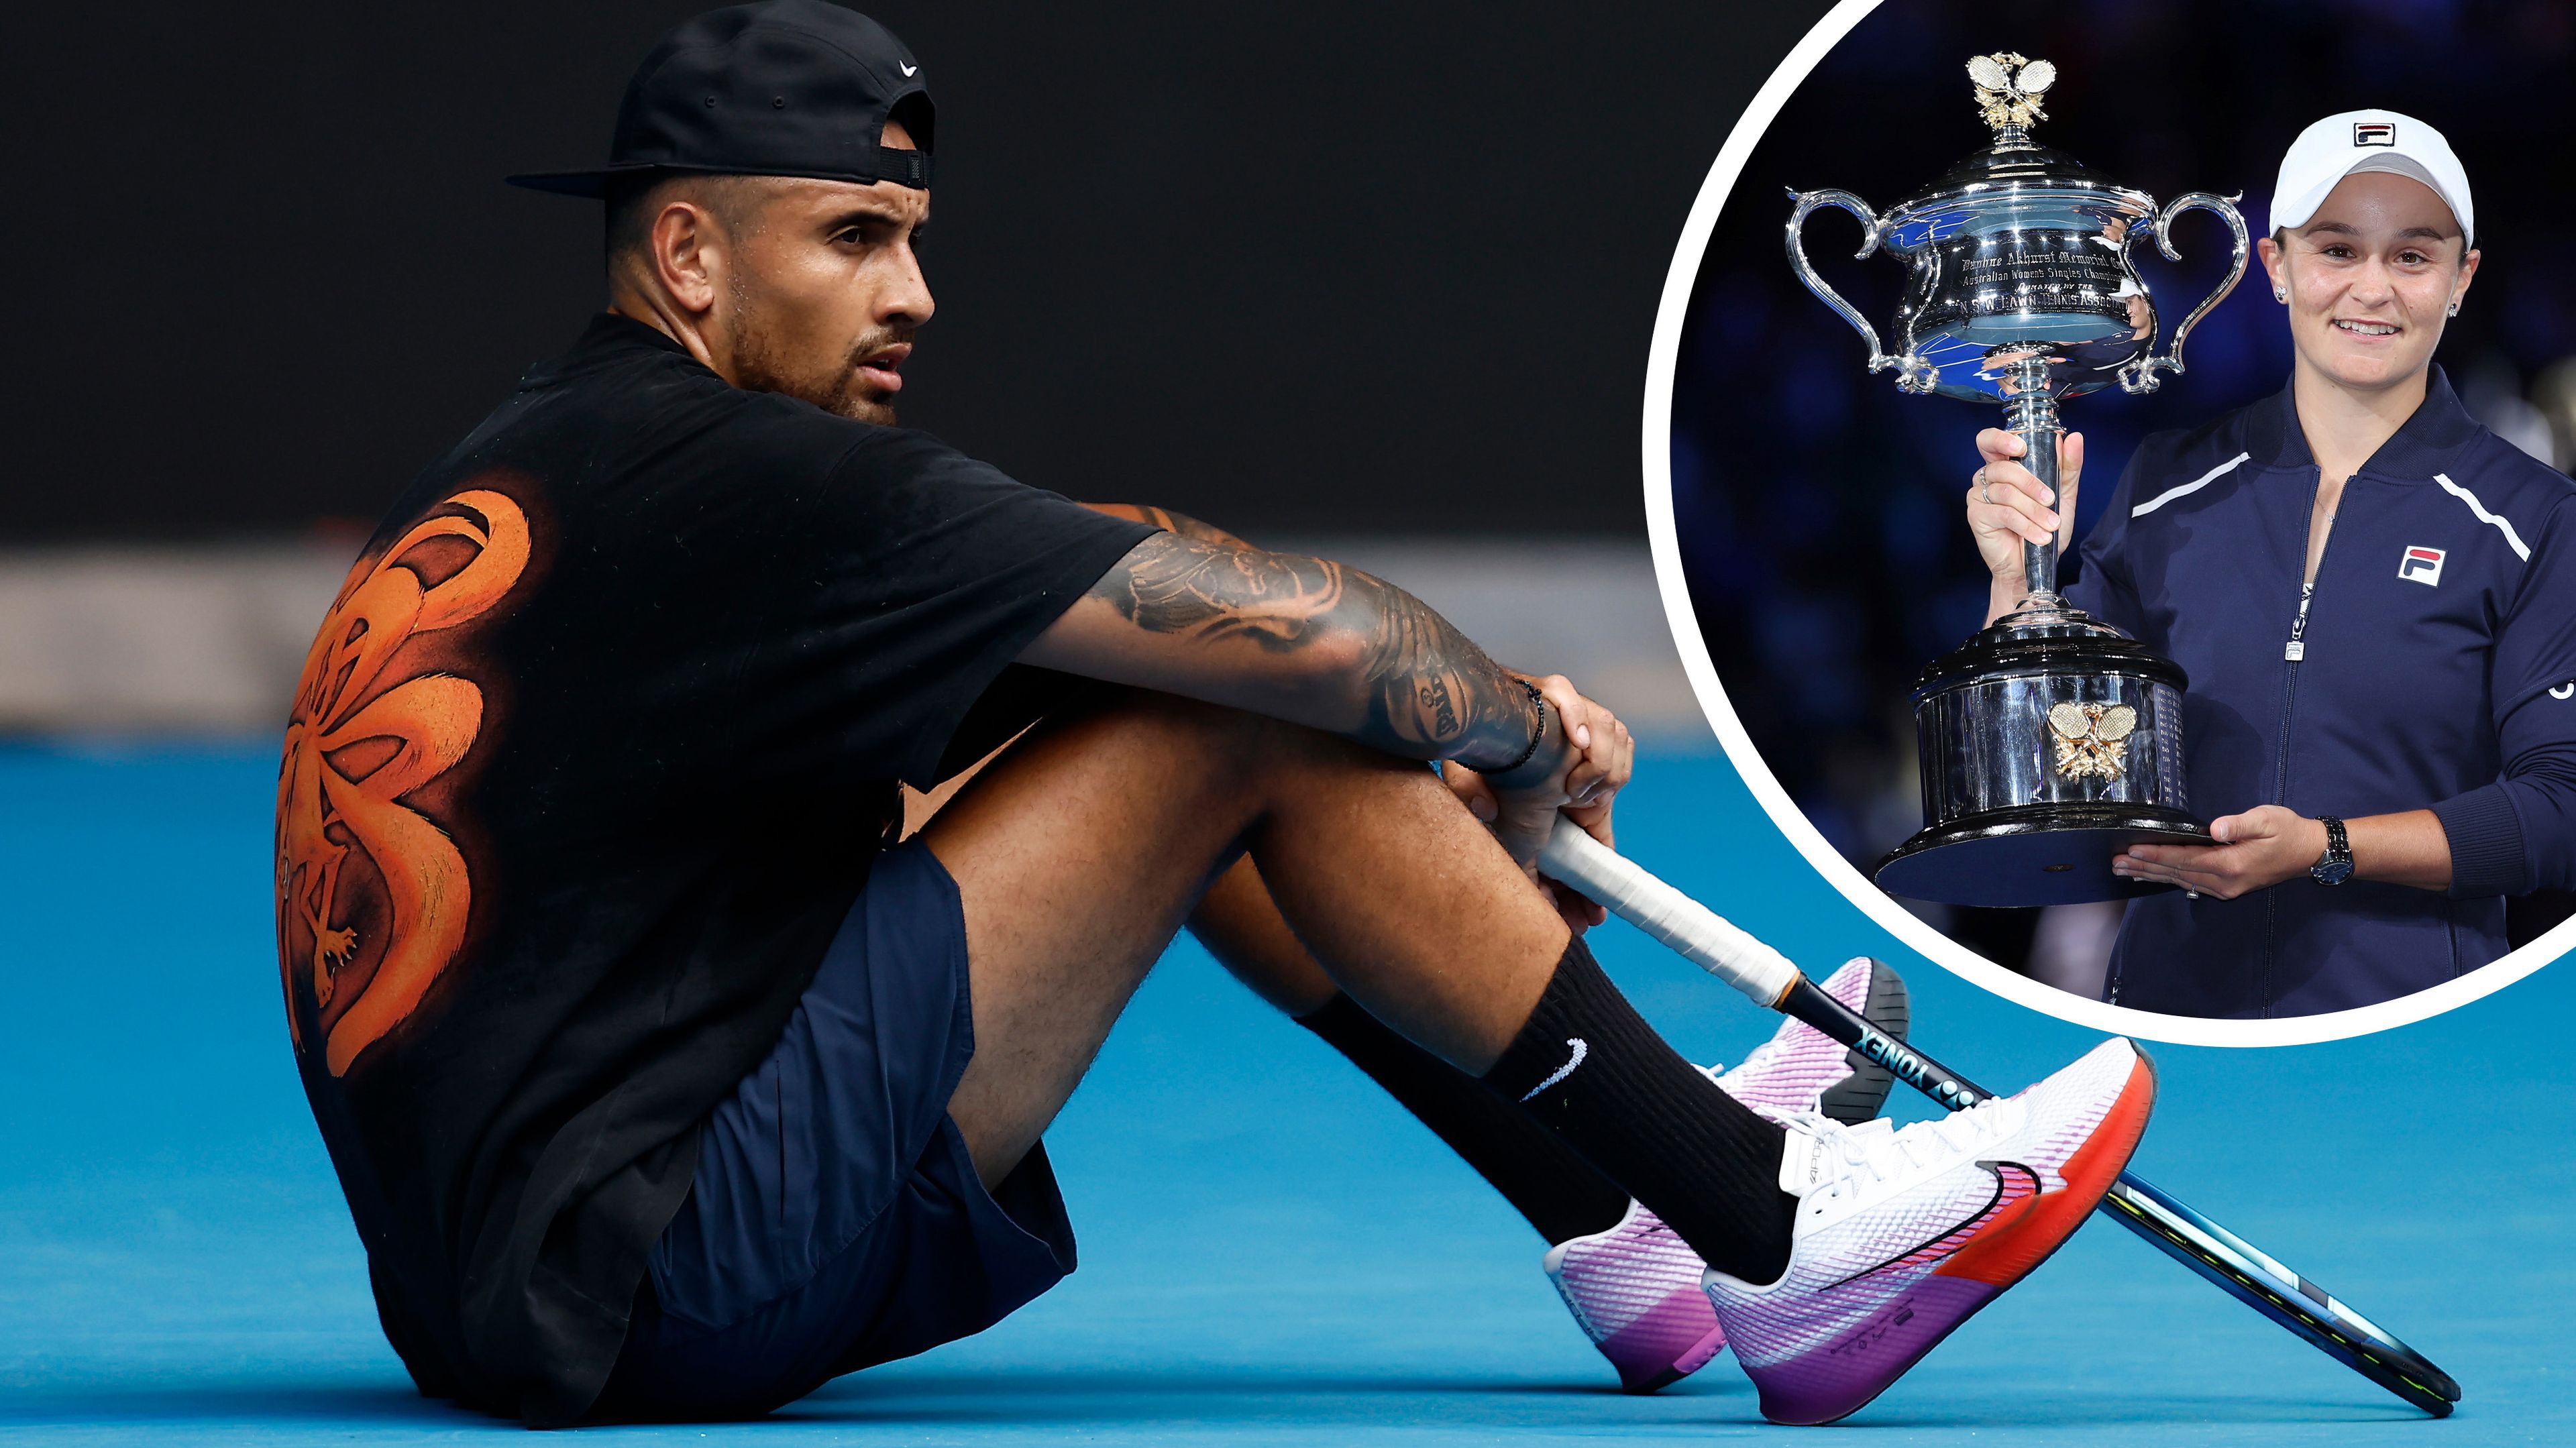 Nick Kyrgios with an inset of Ash Barty with the Australian Open 2022 trophy.